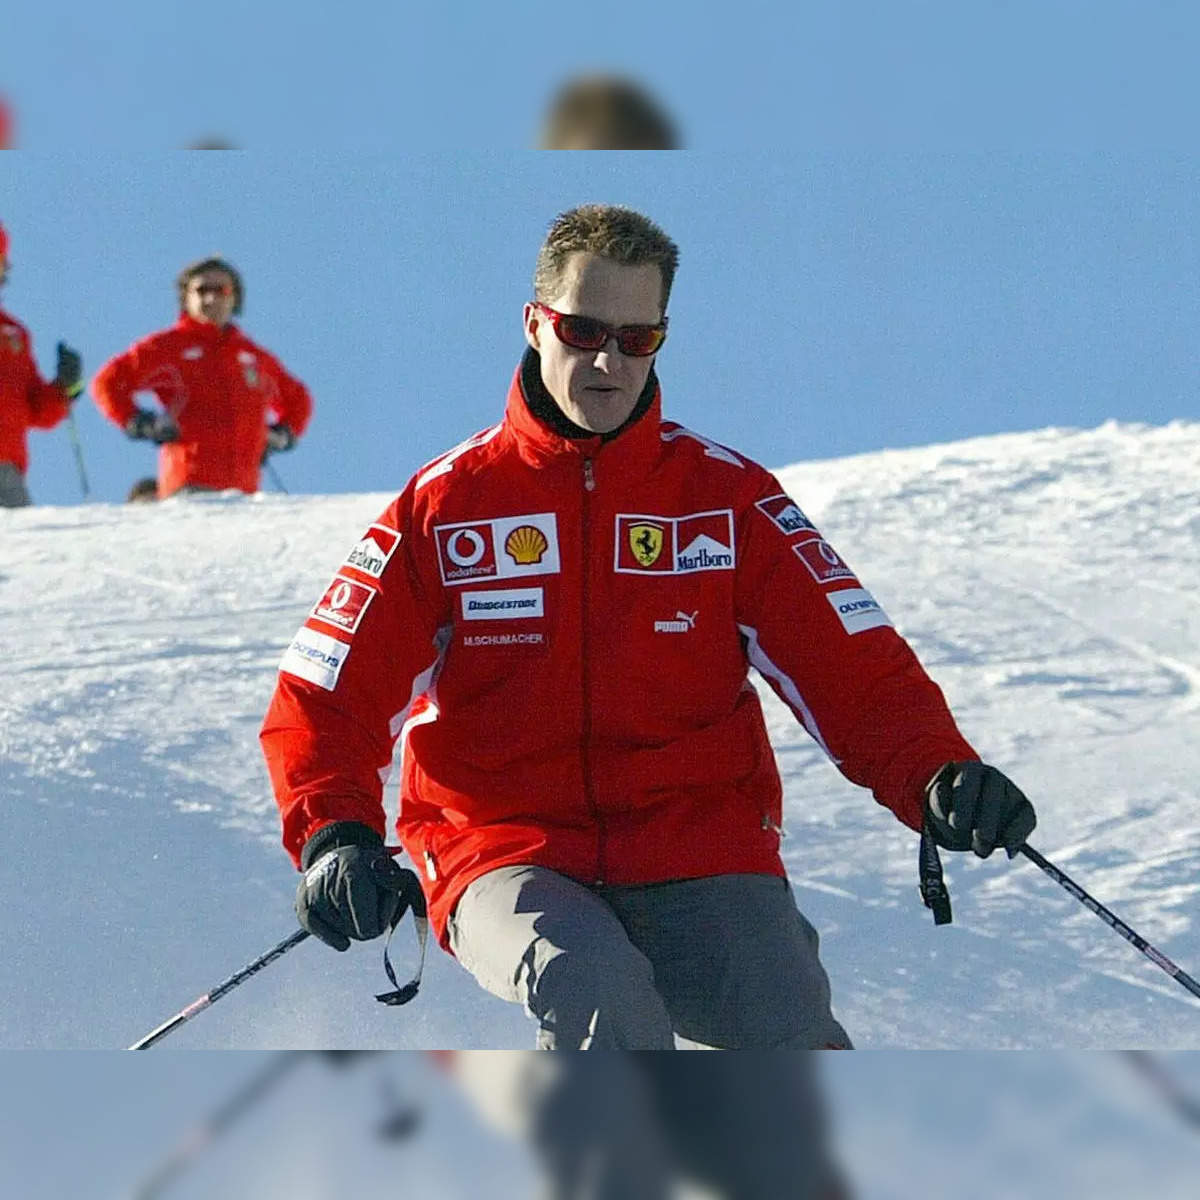 schumacher: What happened to Michael Schumacher in 2013 and what all we  know since then? - The Economic Times